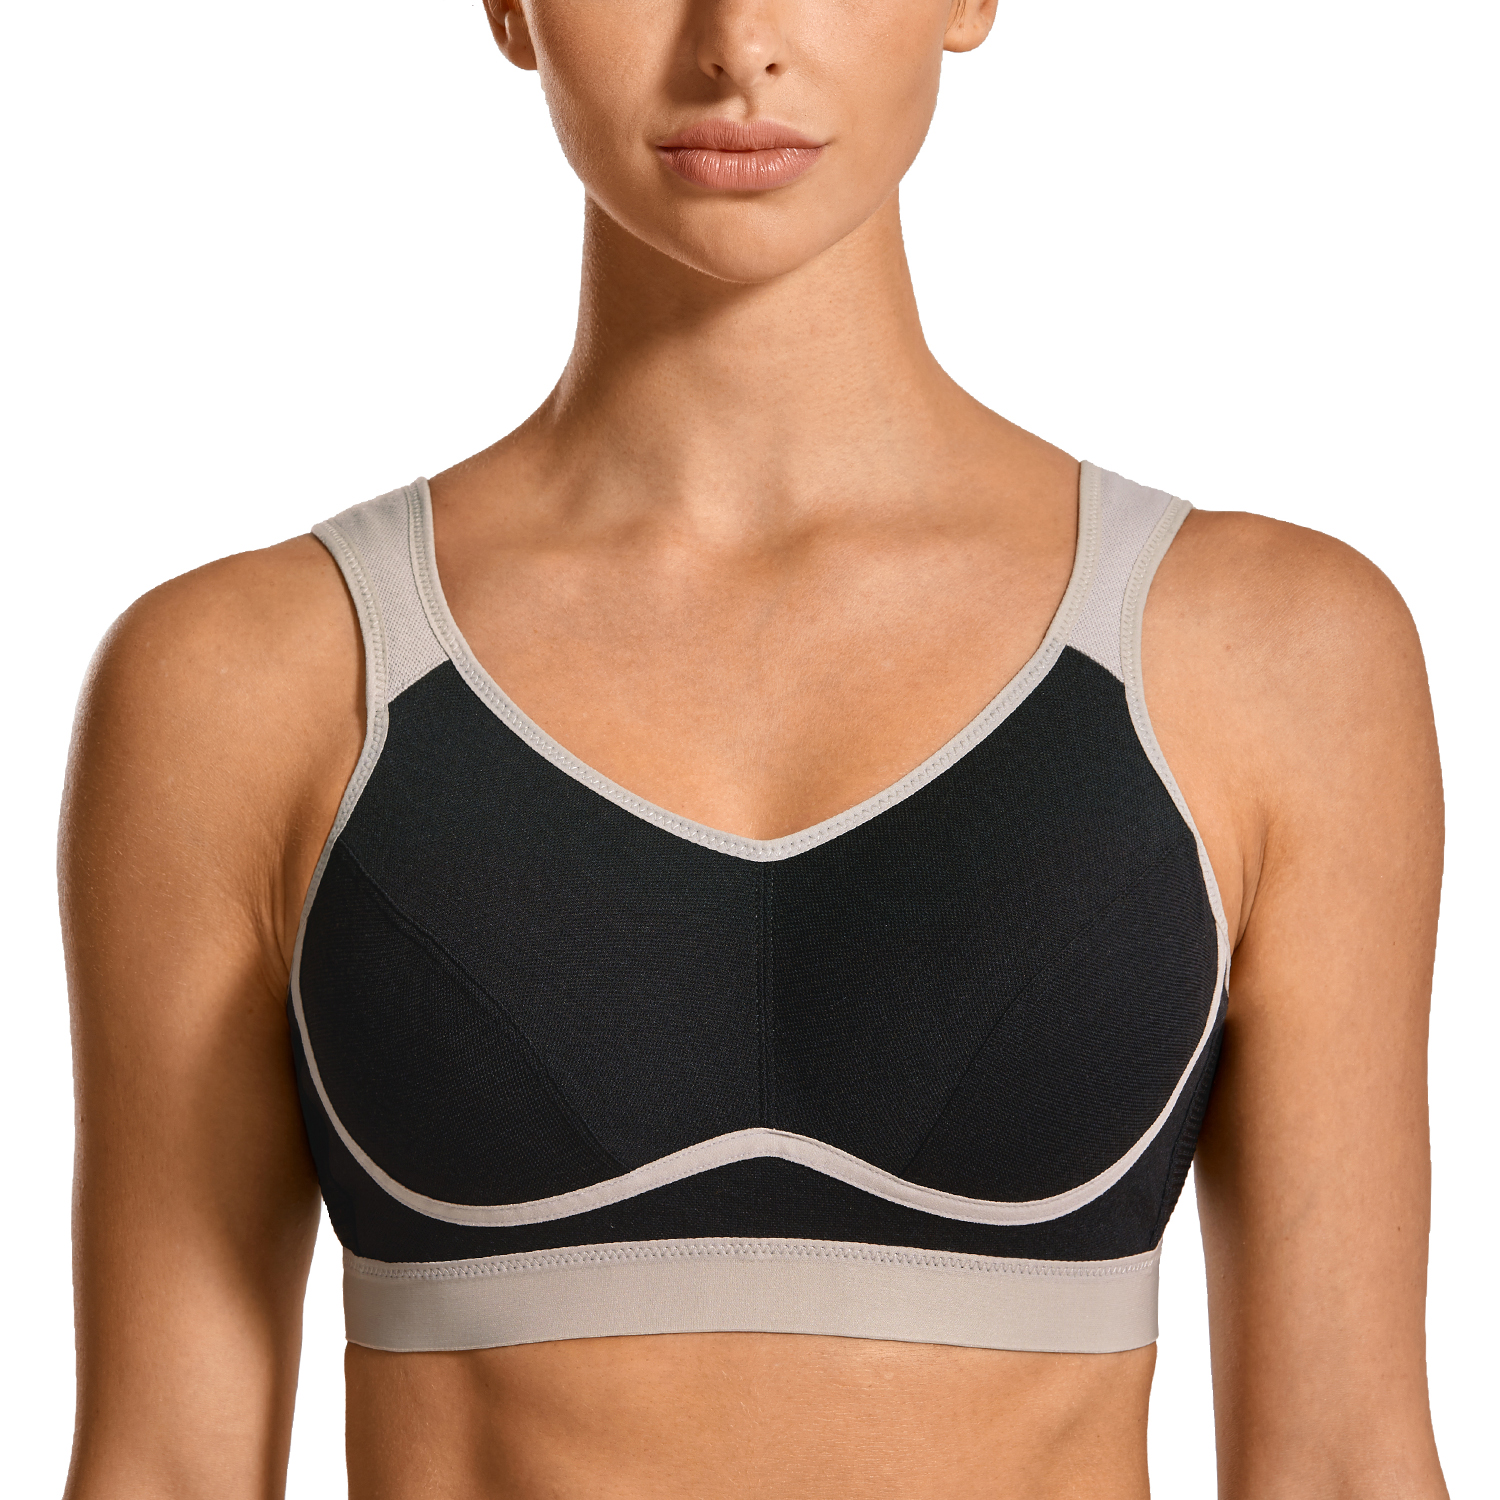 SYROKAN Womens High Impact Full Coverage Bounce Control Underwire Workout Sports Bra